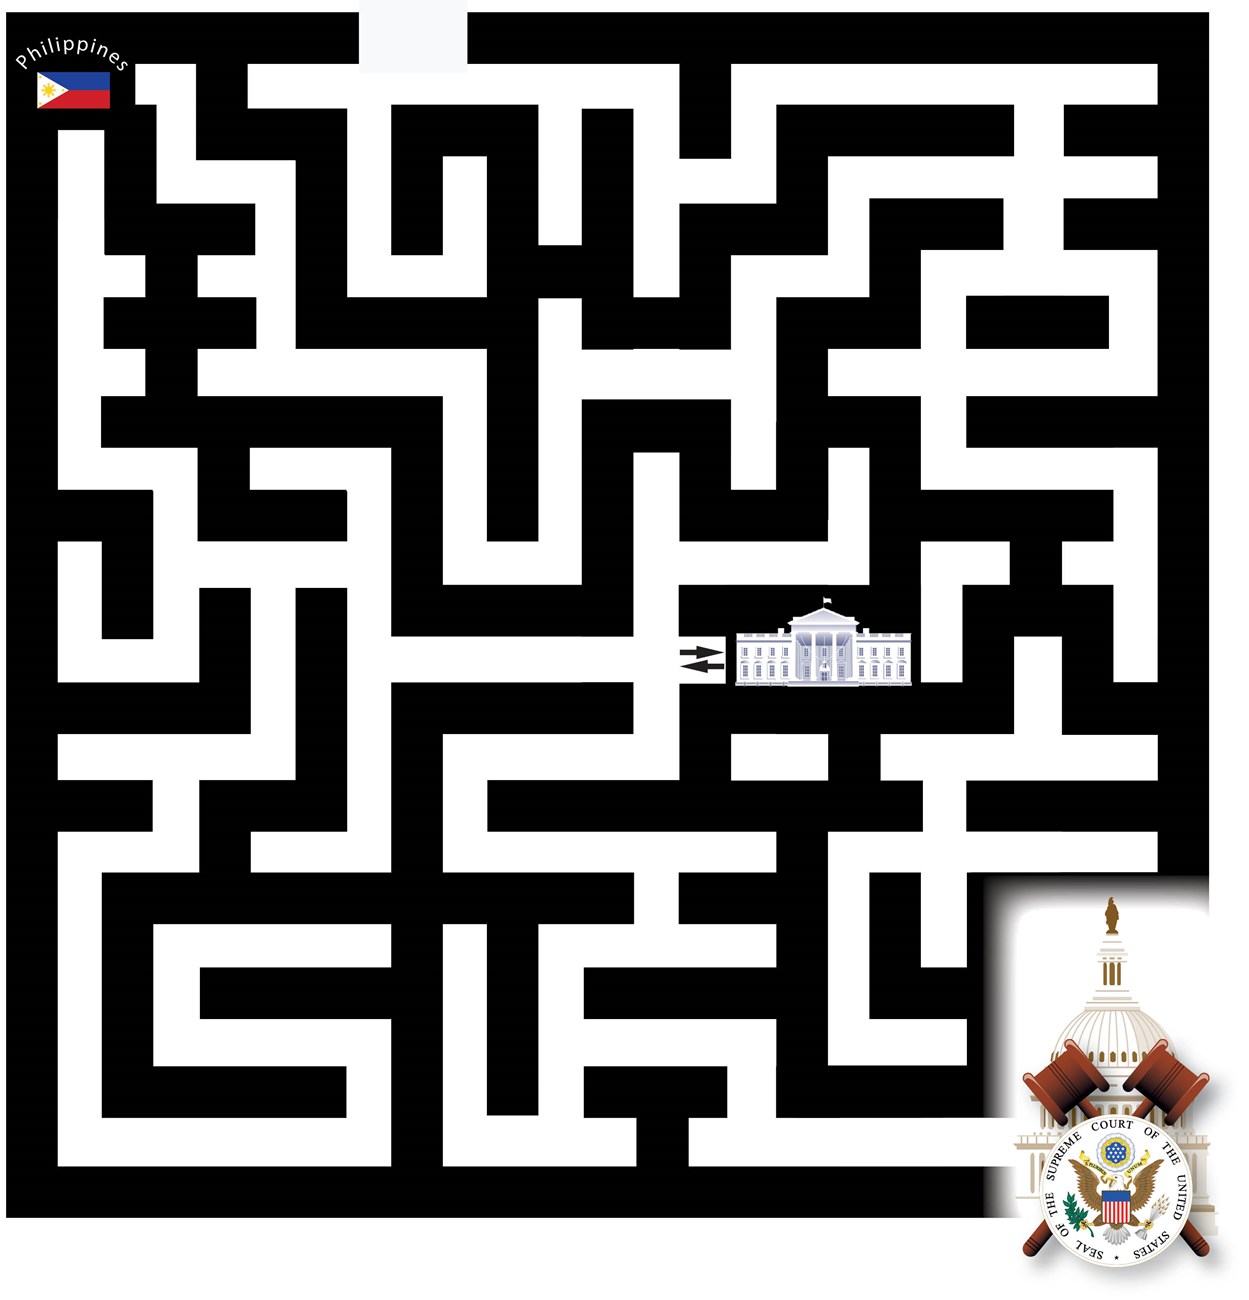 A maze puzzle with Philippines in upper left and Supreme Court logo on lower right